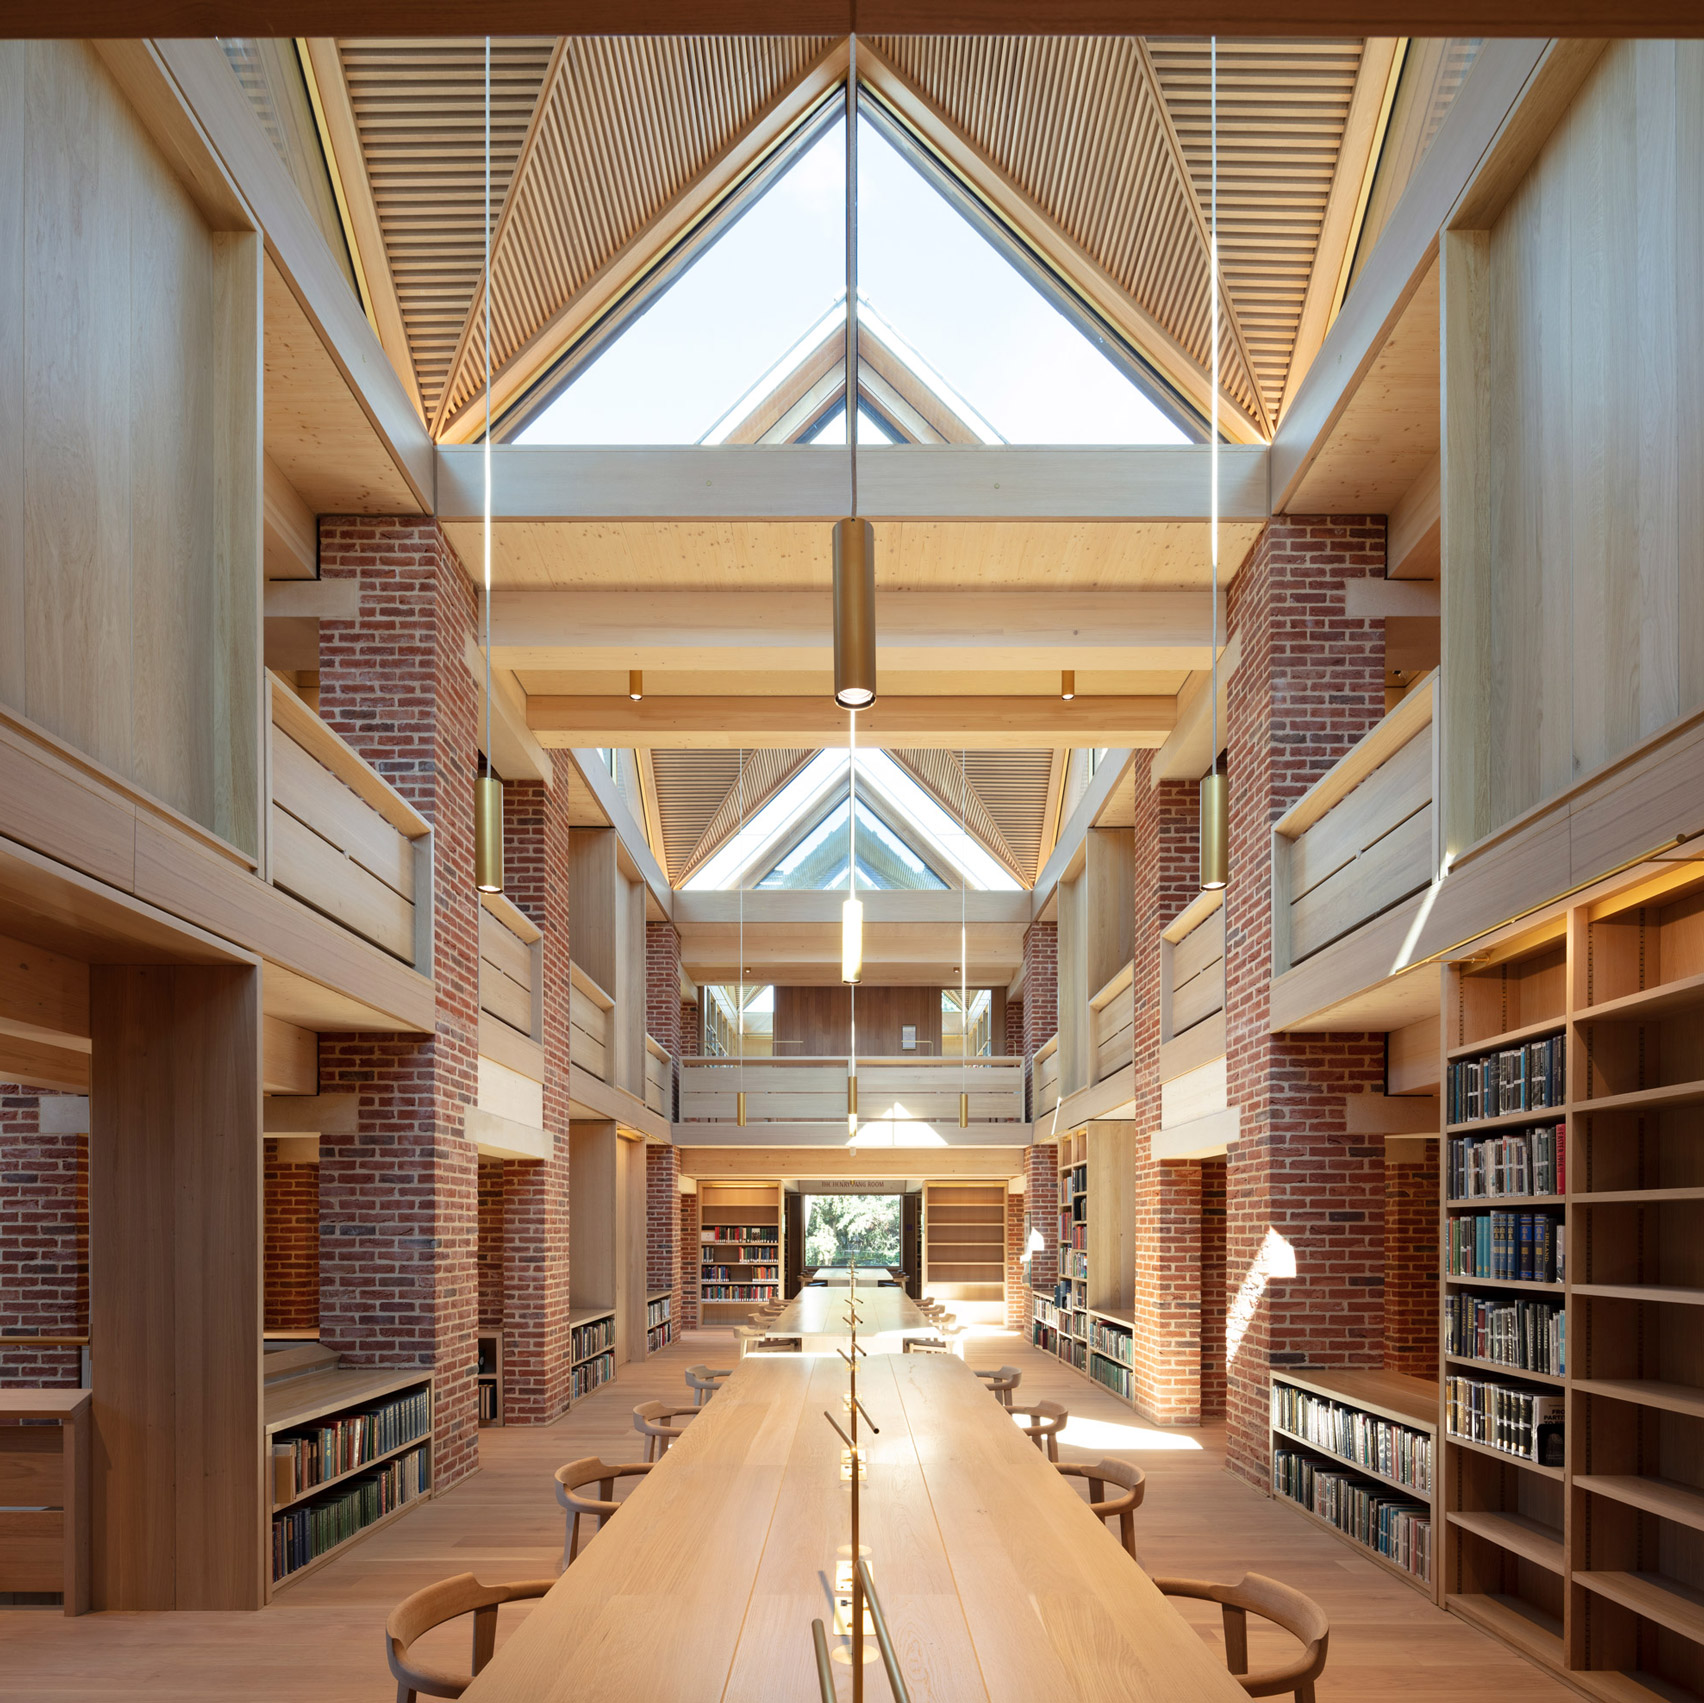 Interior of library with skylights